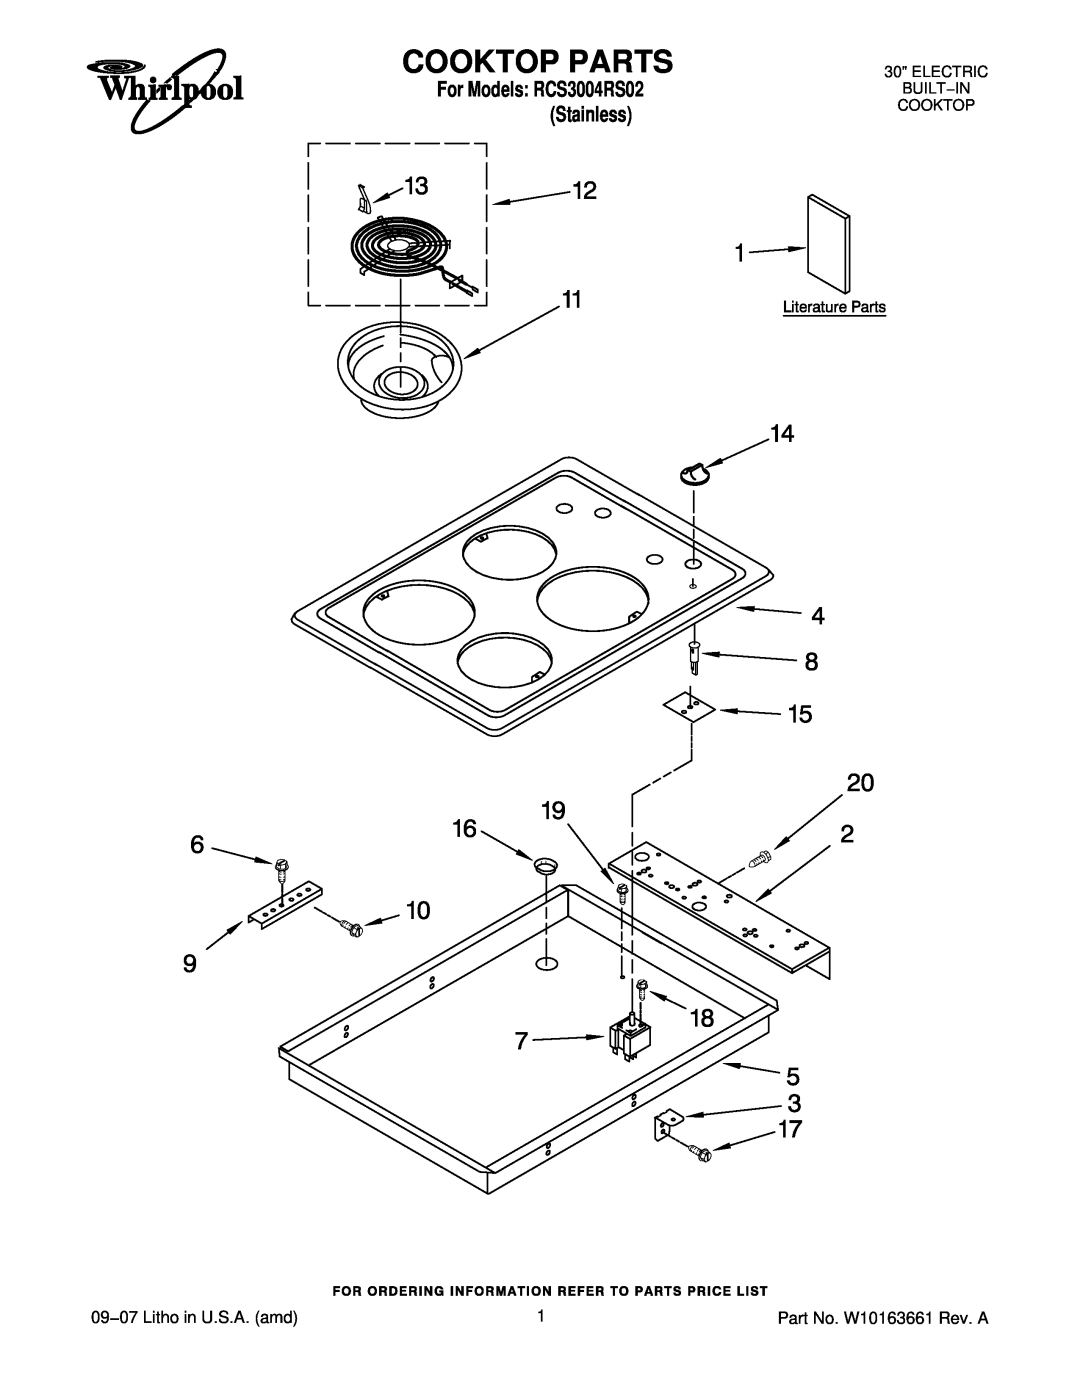 Whirlpool manual Cooktop Parts, 09−07 Litho in U.S.A. amd, For Models RCS3004RS02 Stainless, Electric Built−In Cooktop 